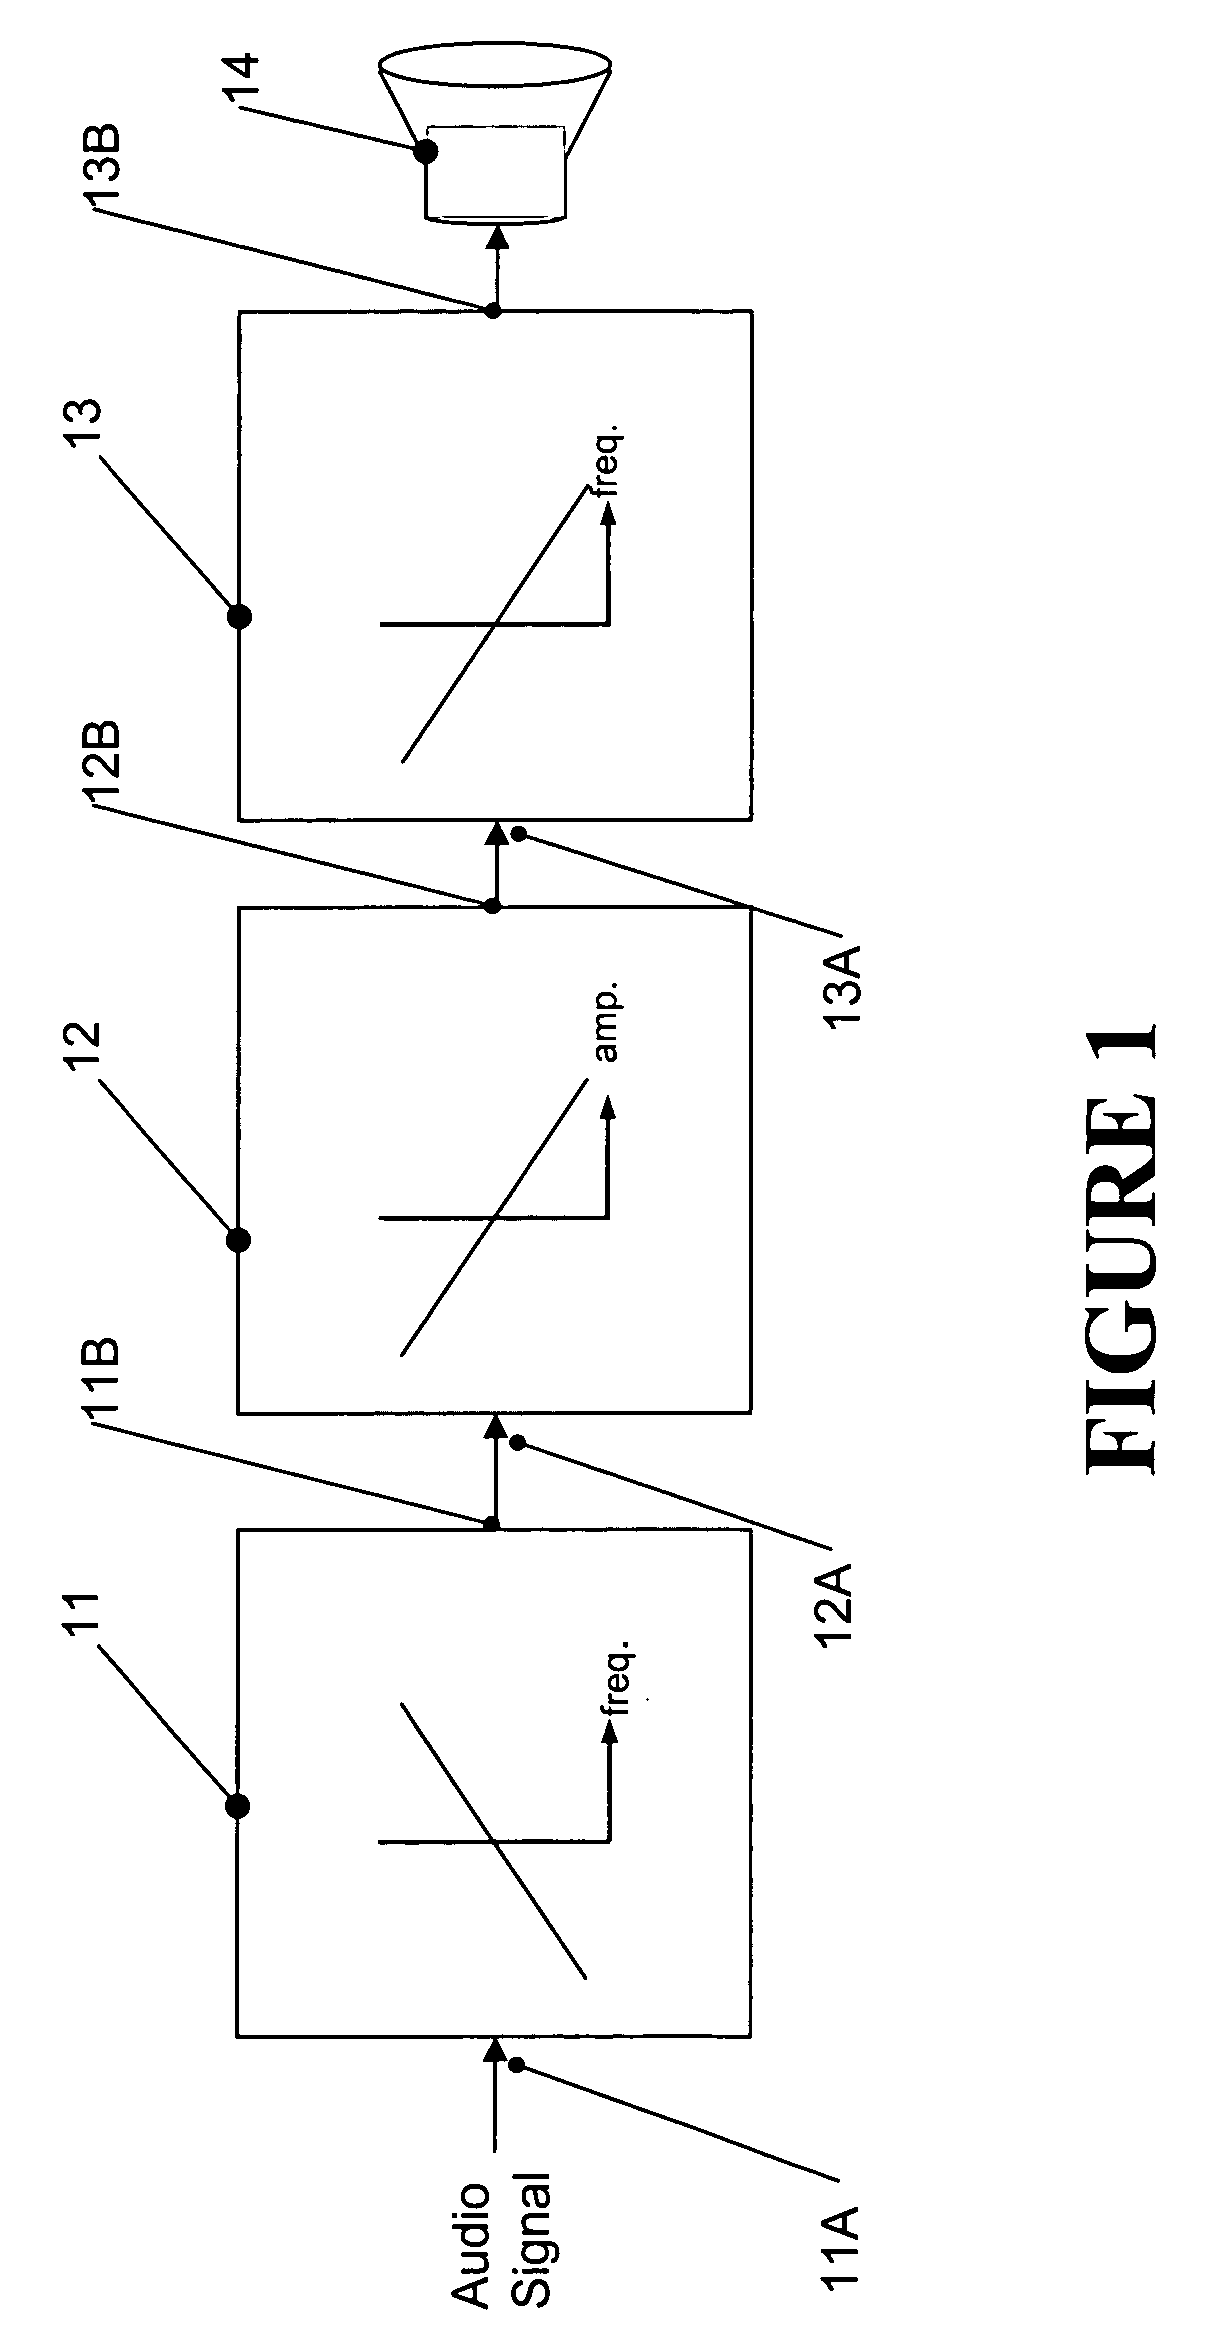 Processing of an audio signal for presentation in a high noise environment